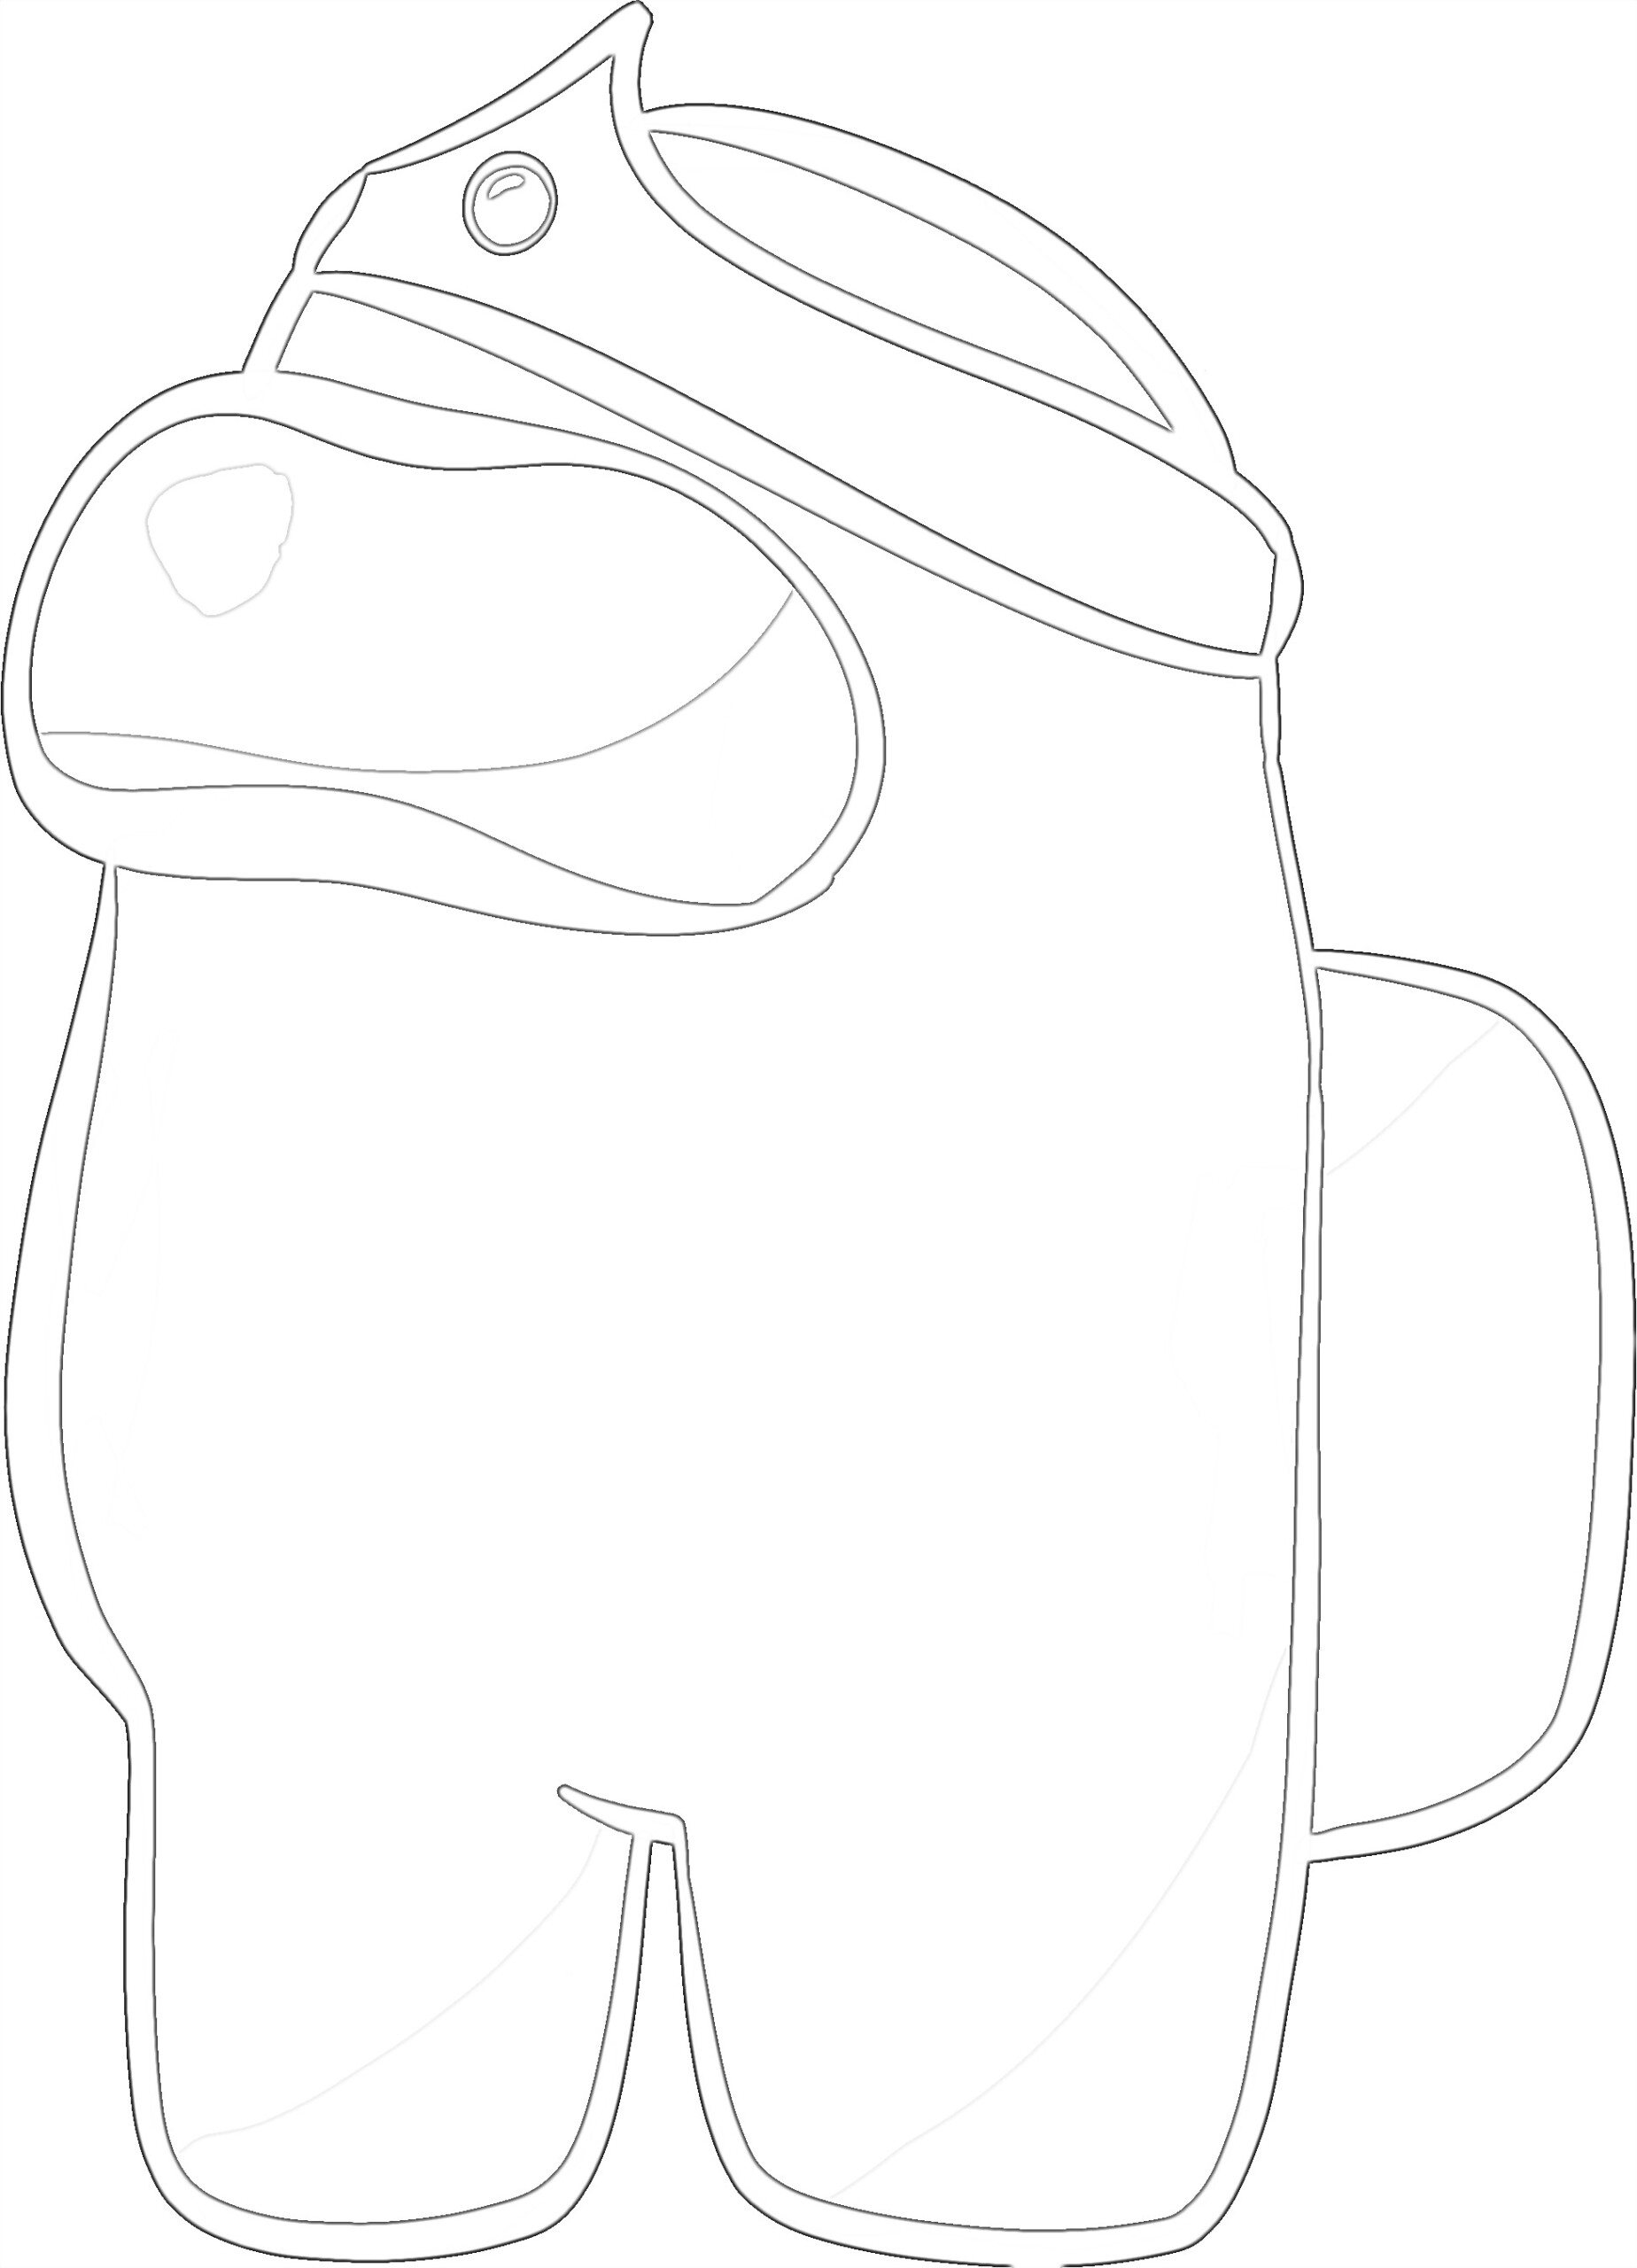 Among Us Crown - Coloring page